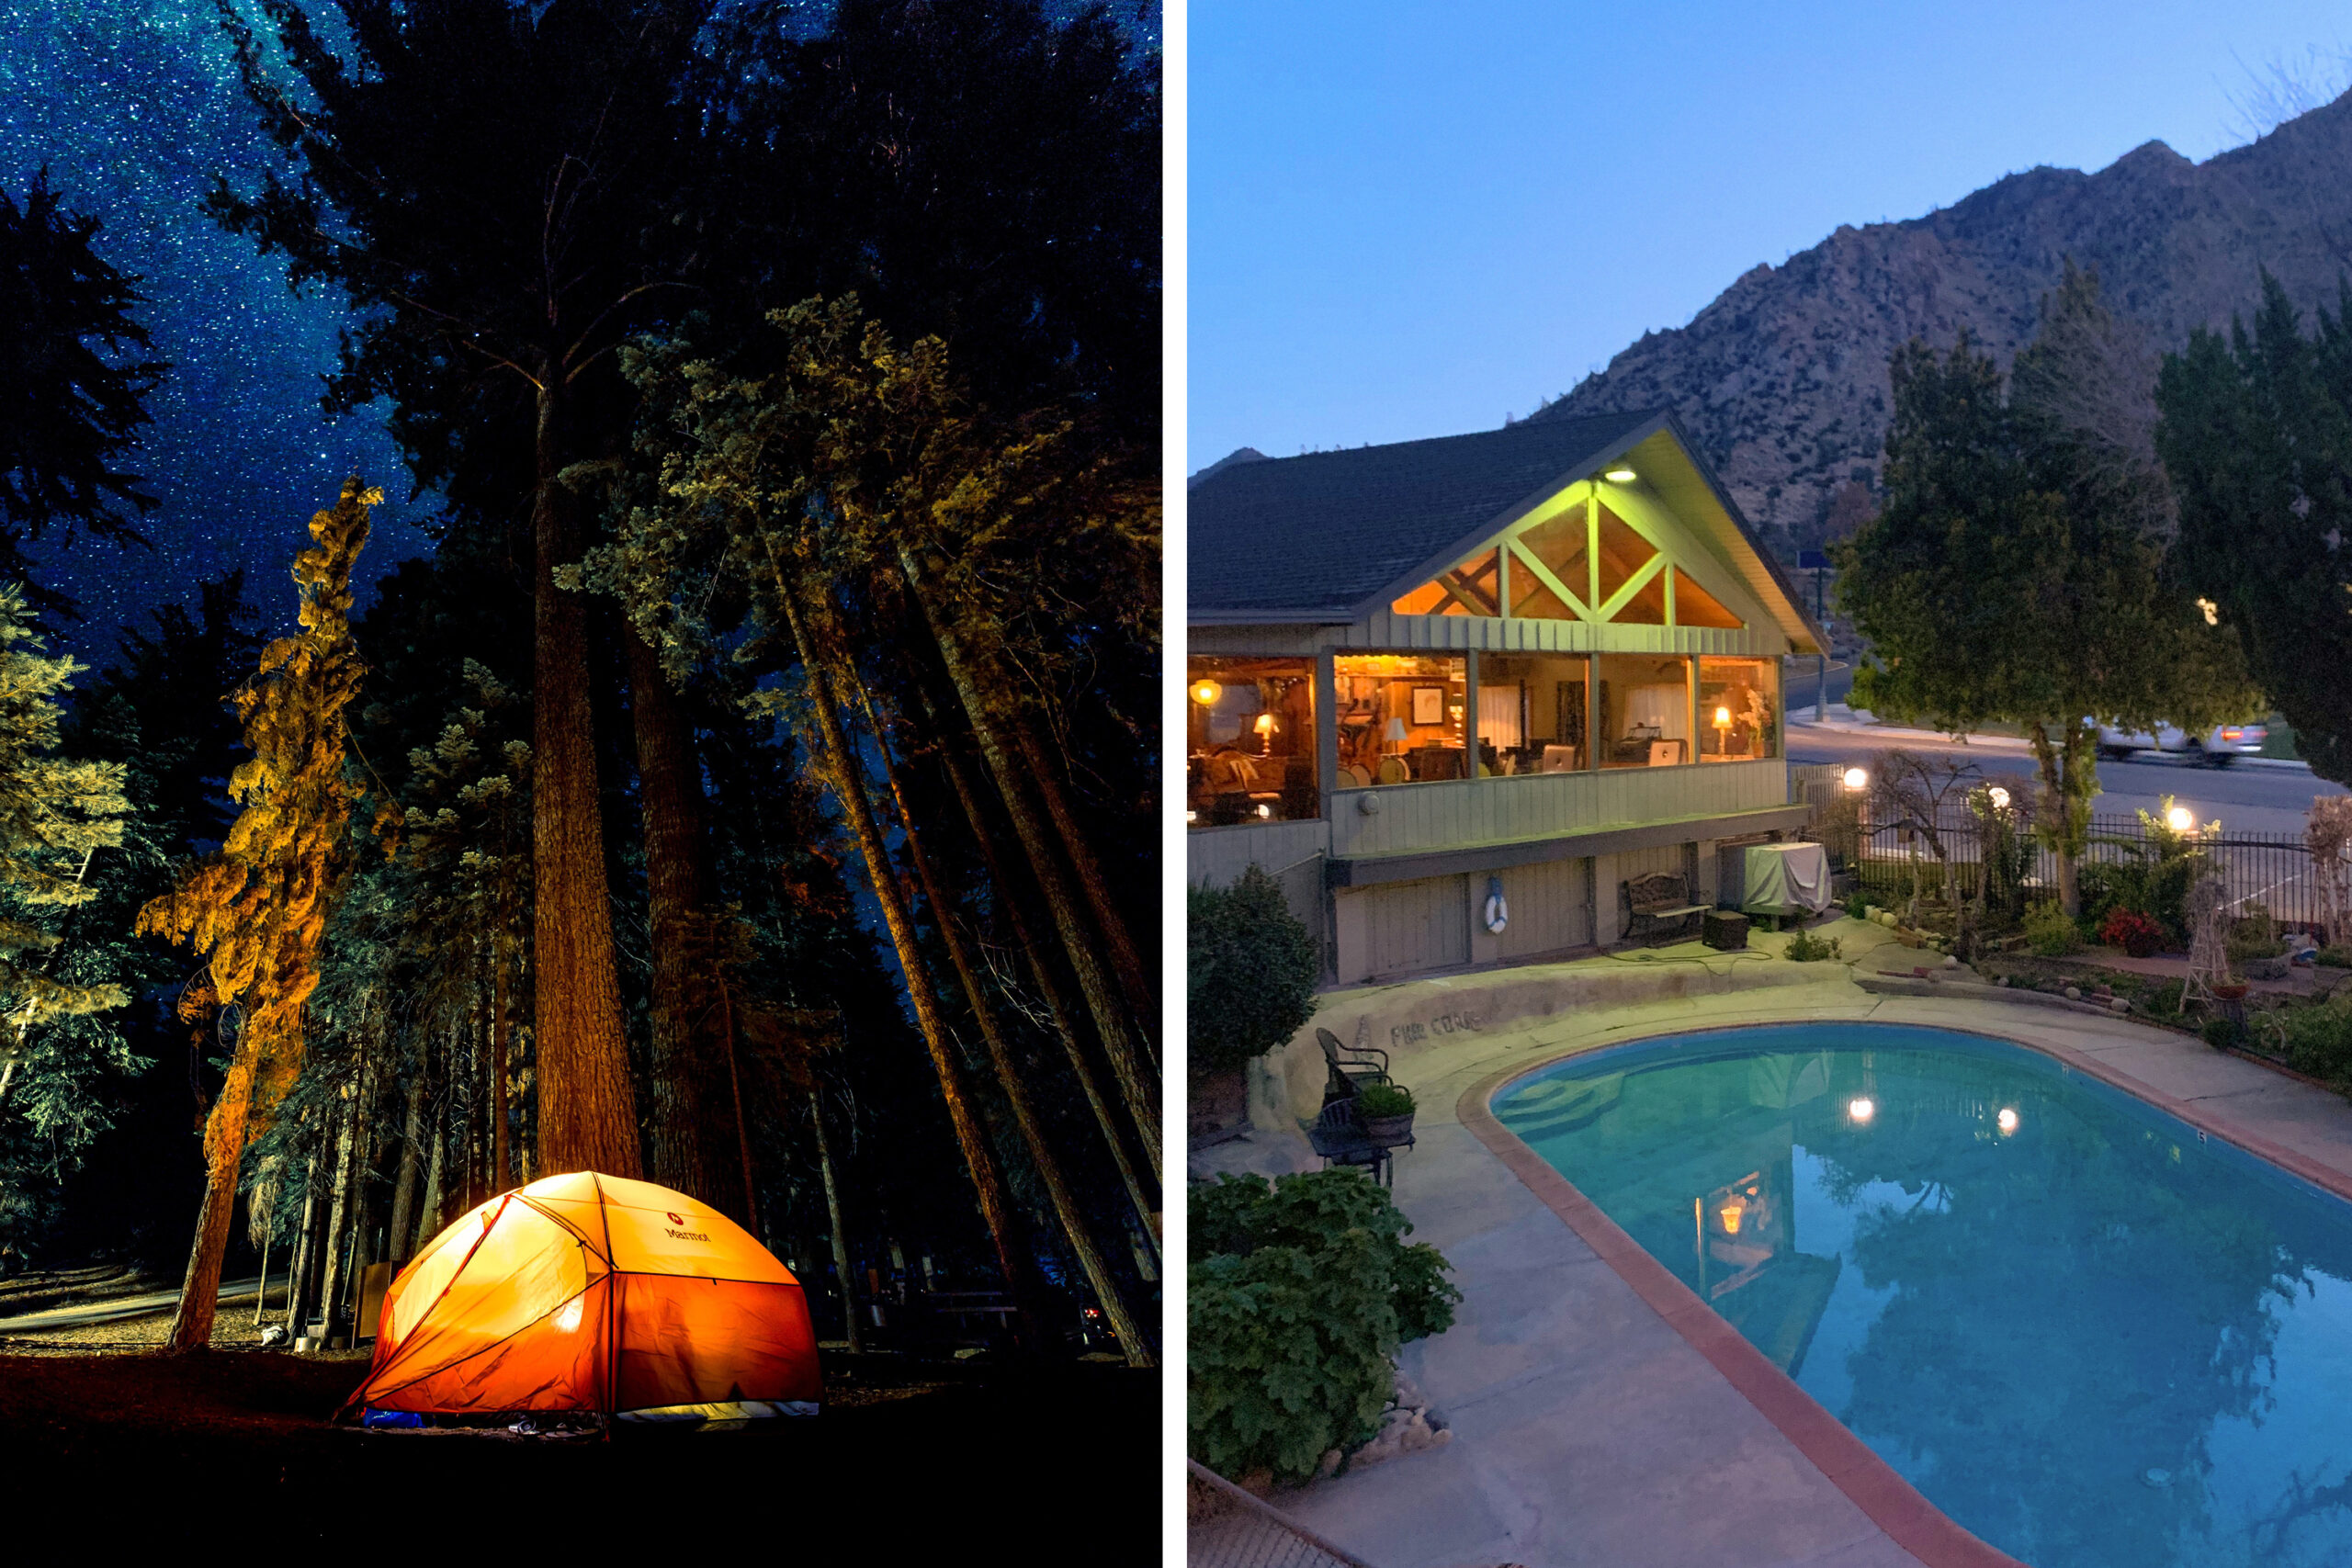 Night view of an orange tent illuminated from the interior set amongst conifer trees on the left and a photo of a pool